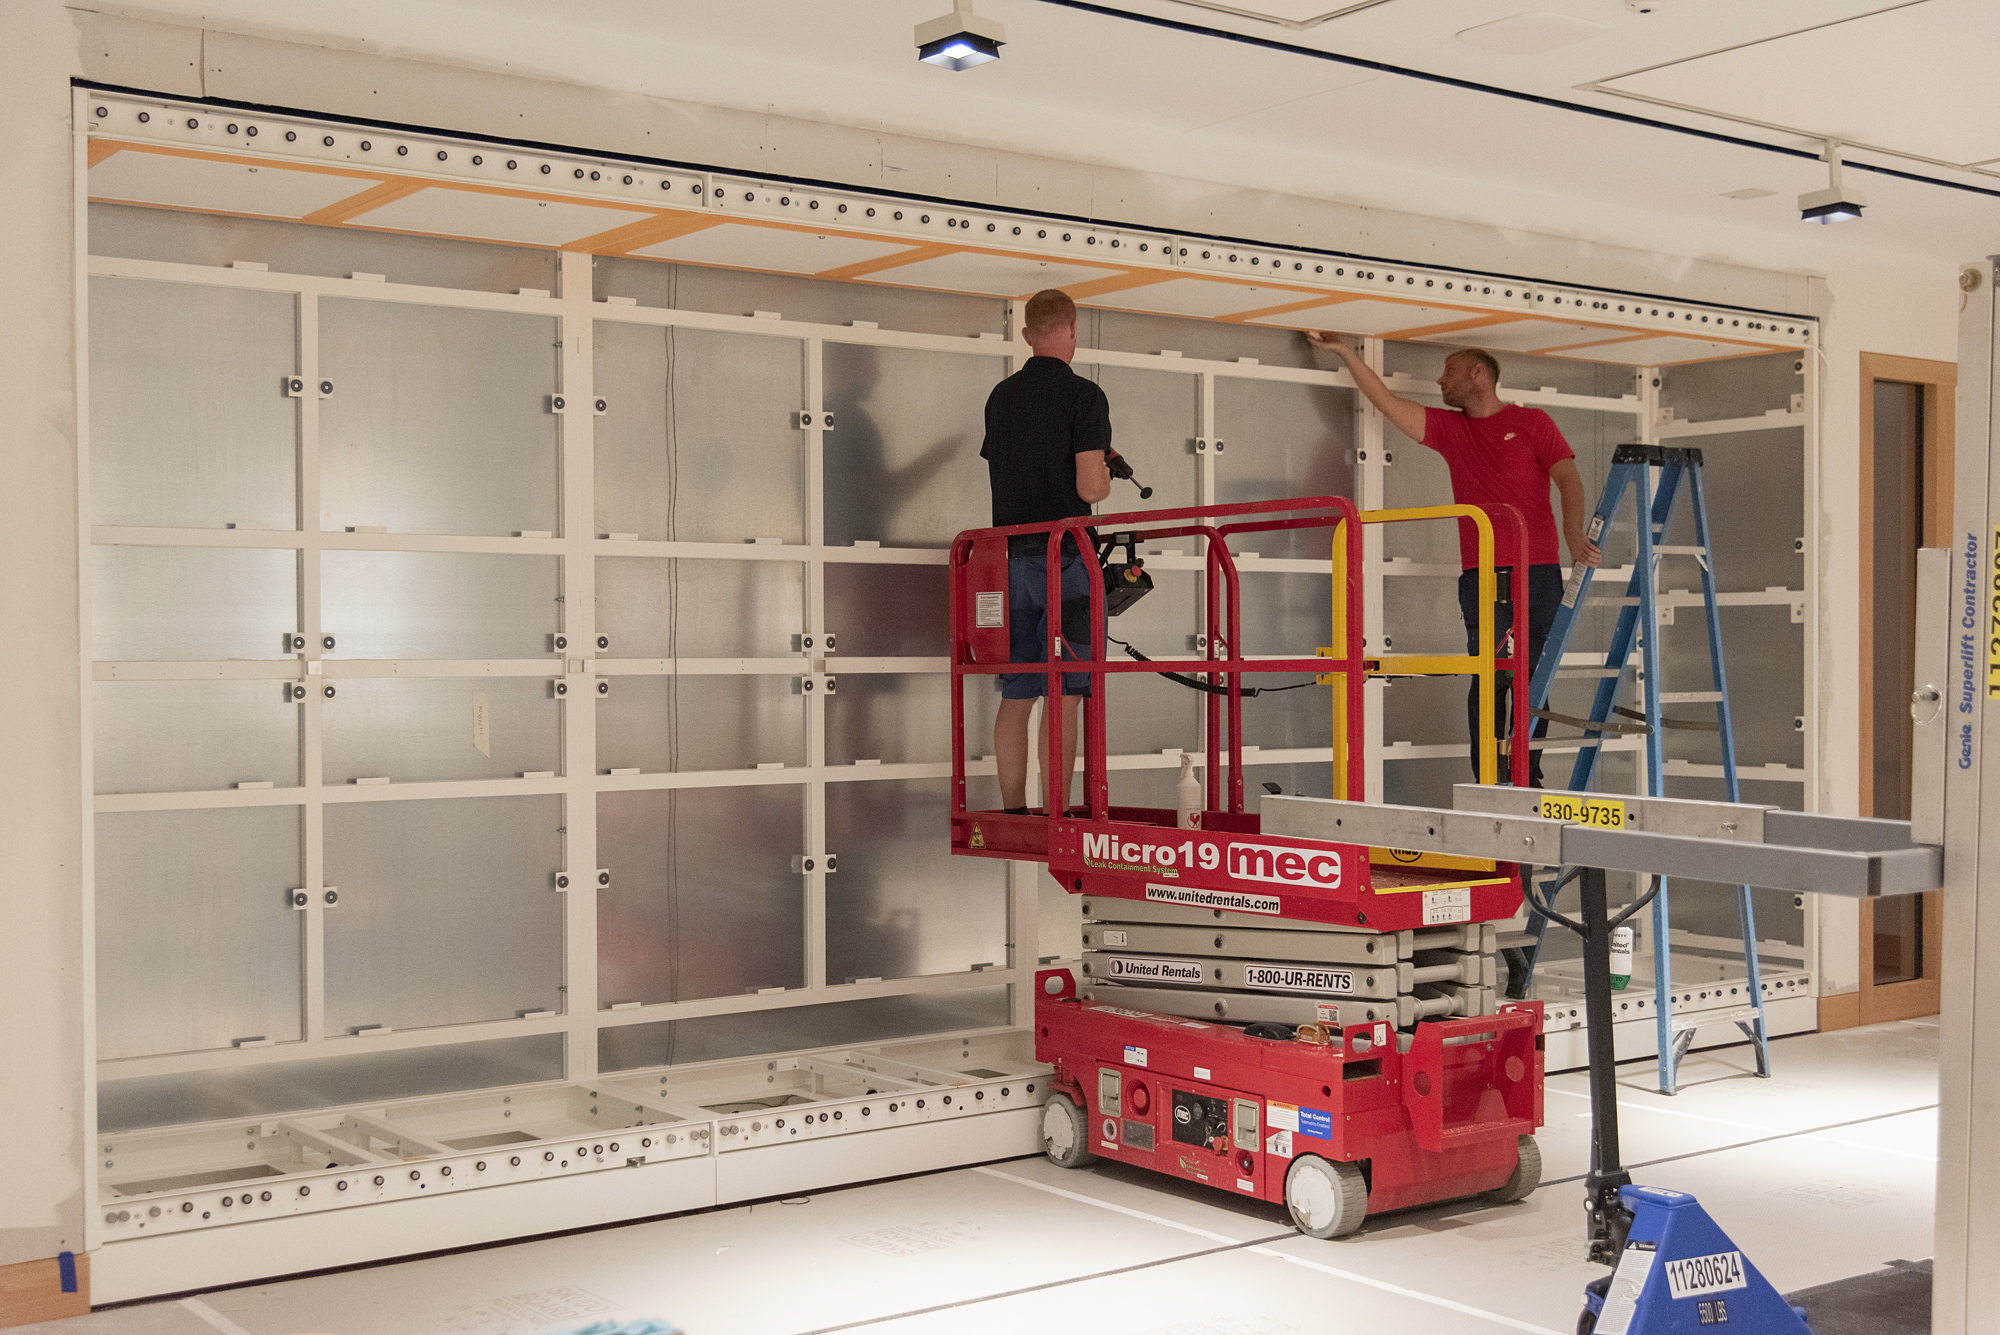 Two workers stand on a lift while installing casing in a bright white room